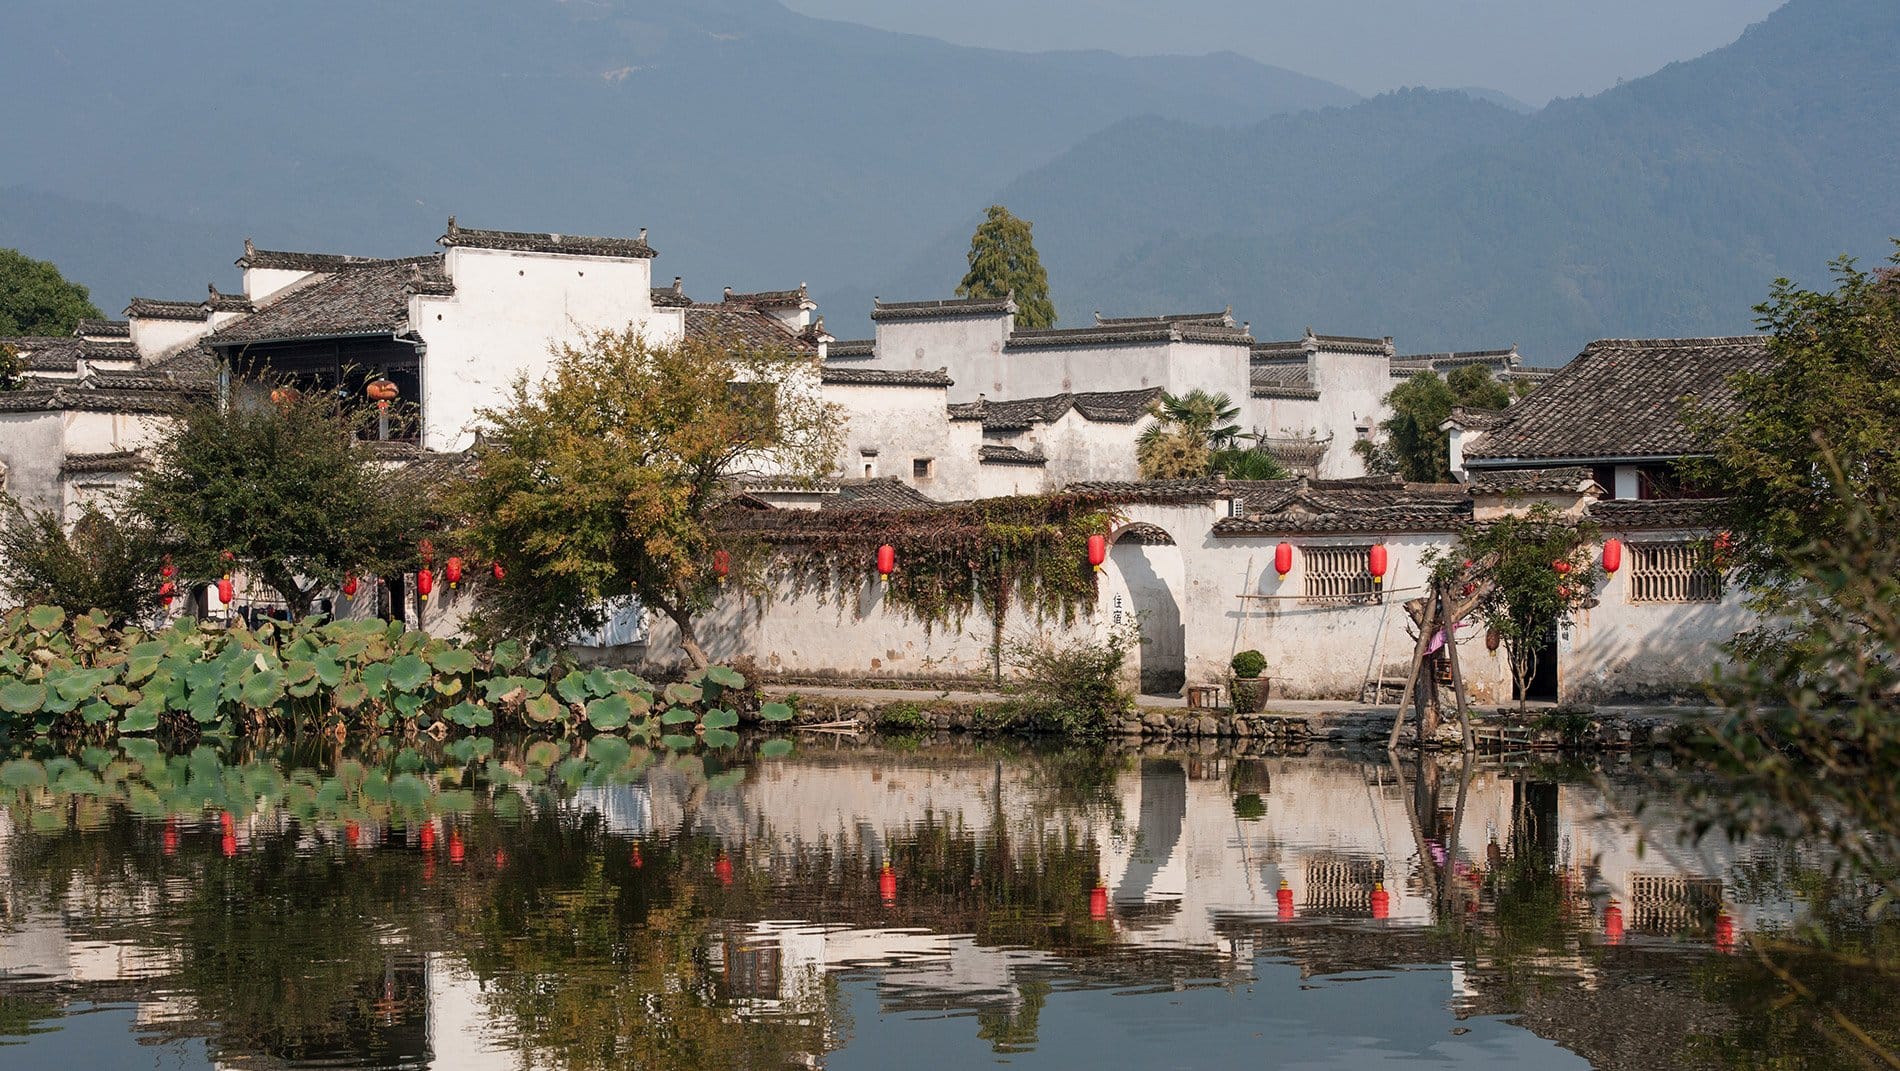 Hongcun~Dating back hundreds of years to the northern Song dynasty, when China’s capital moved to nearby Hangzhou, numerous ancient, pretty villages, such as this one, dot the landscape.